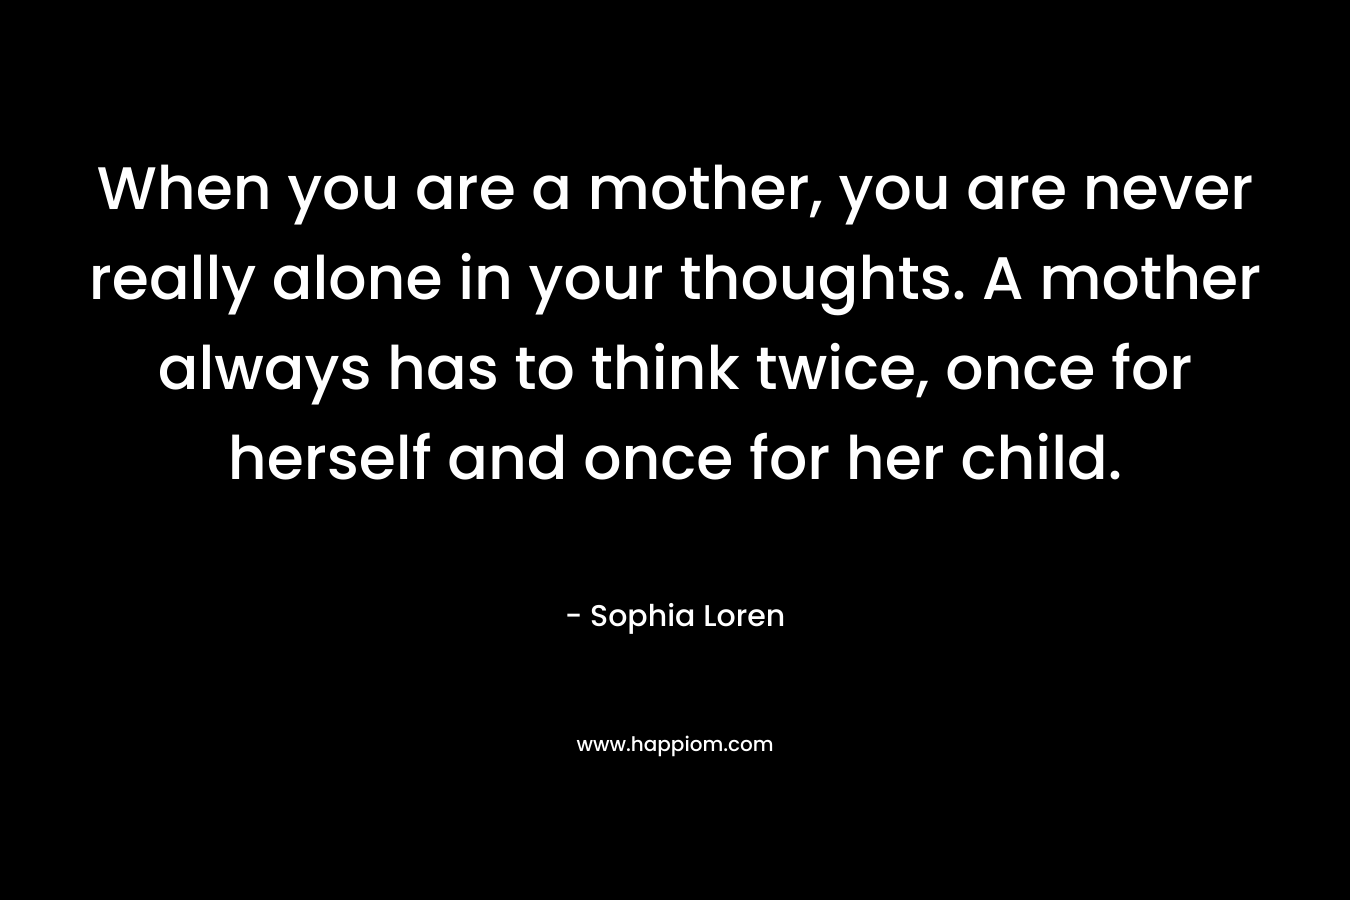 When you are a mother, you are never really alone in your thoughts. A mother always has to think twice, once for herself and once for her child.